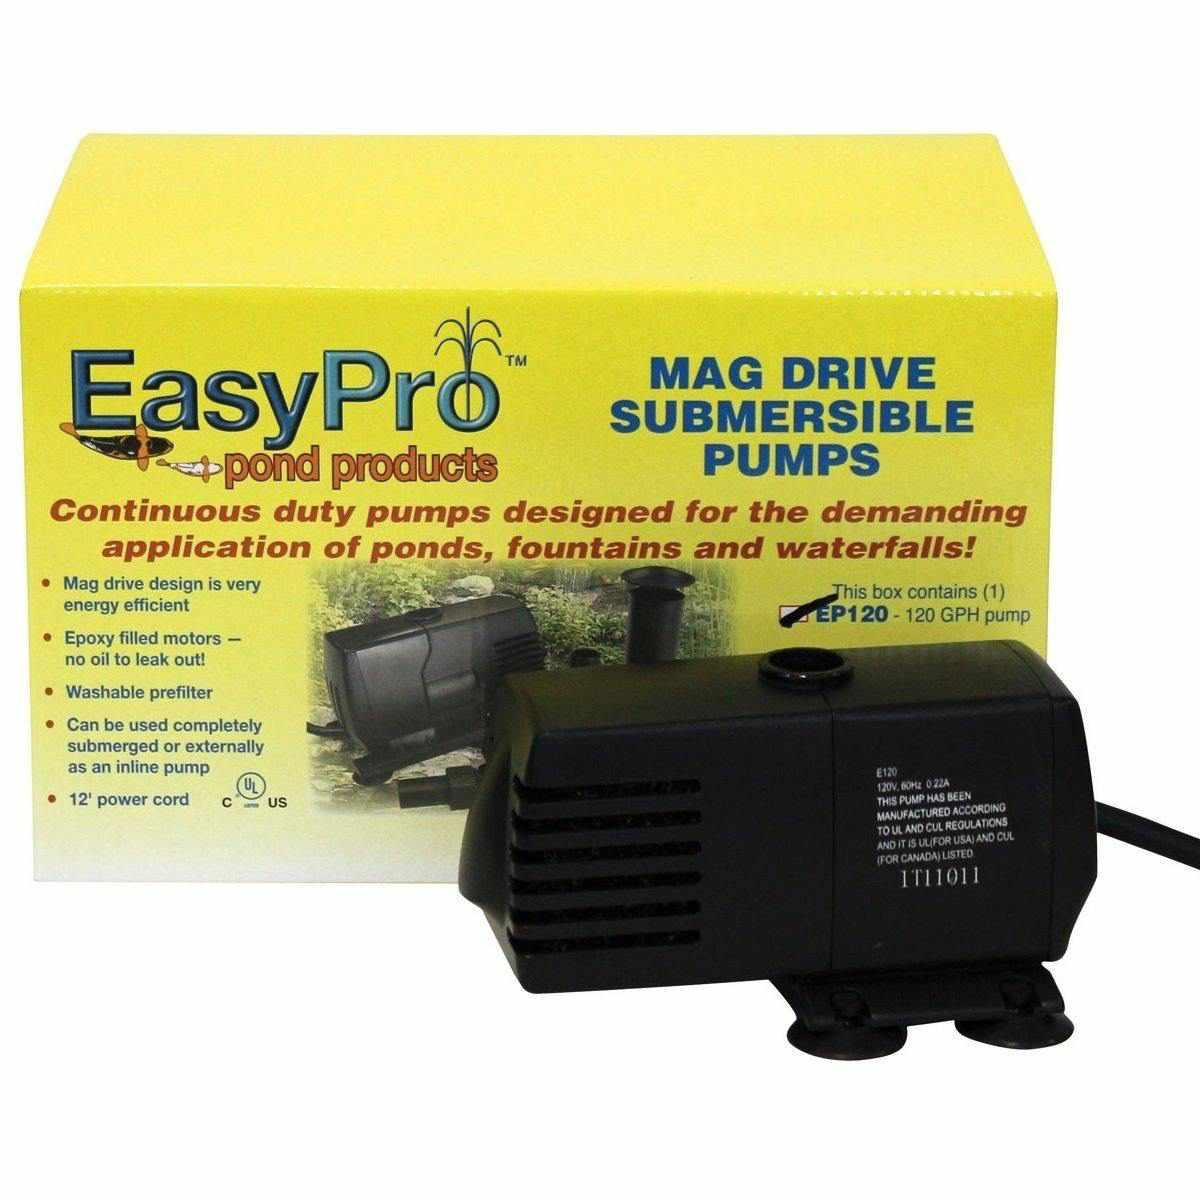 EasyPro Submersible Mag Drive Pond & Fountain Pumps - Play It Koi